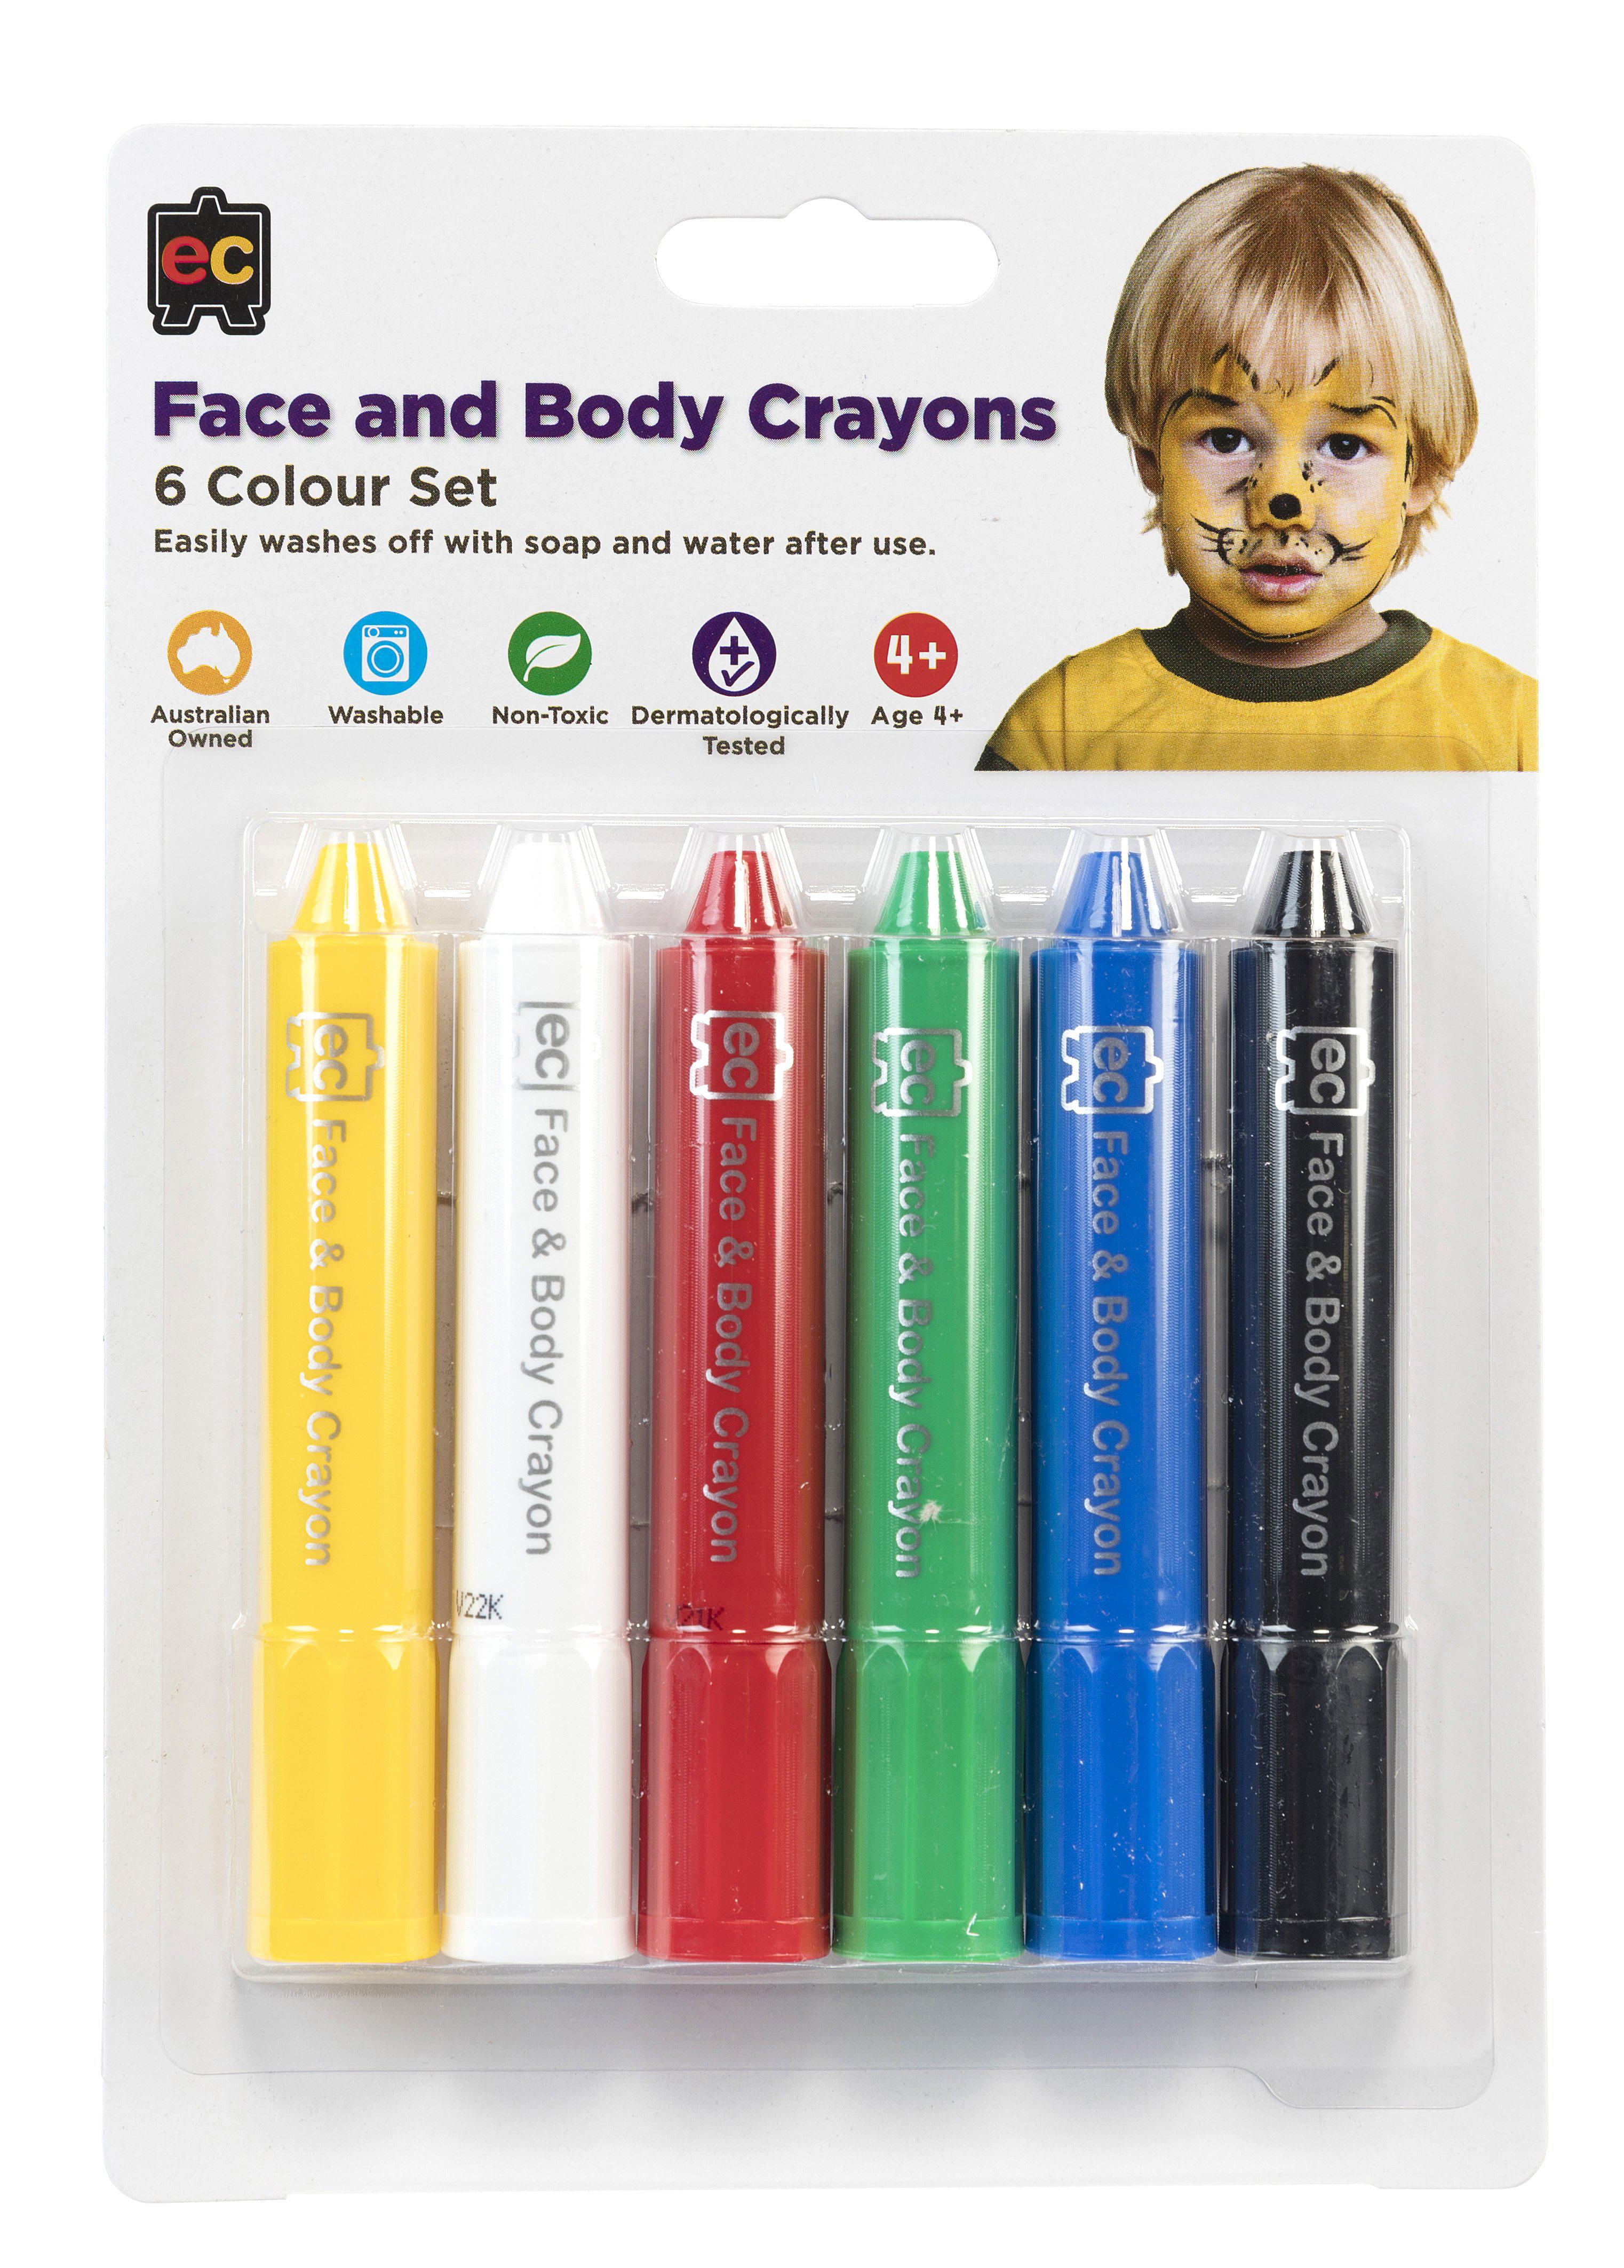 Face and Body Crayons